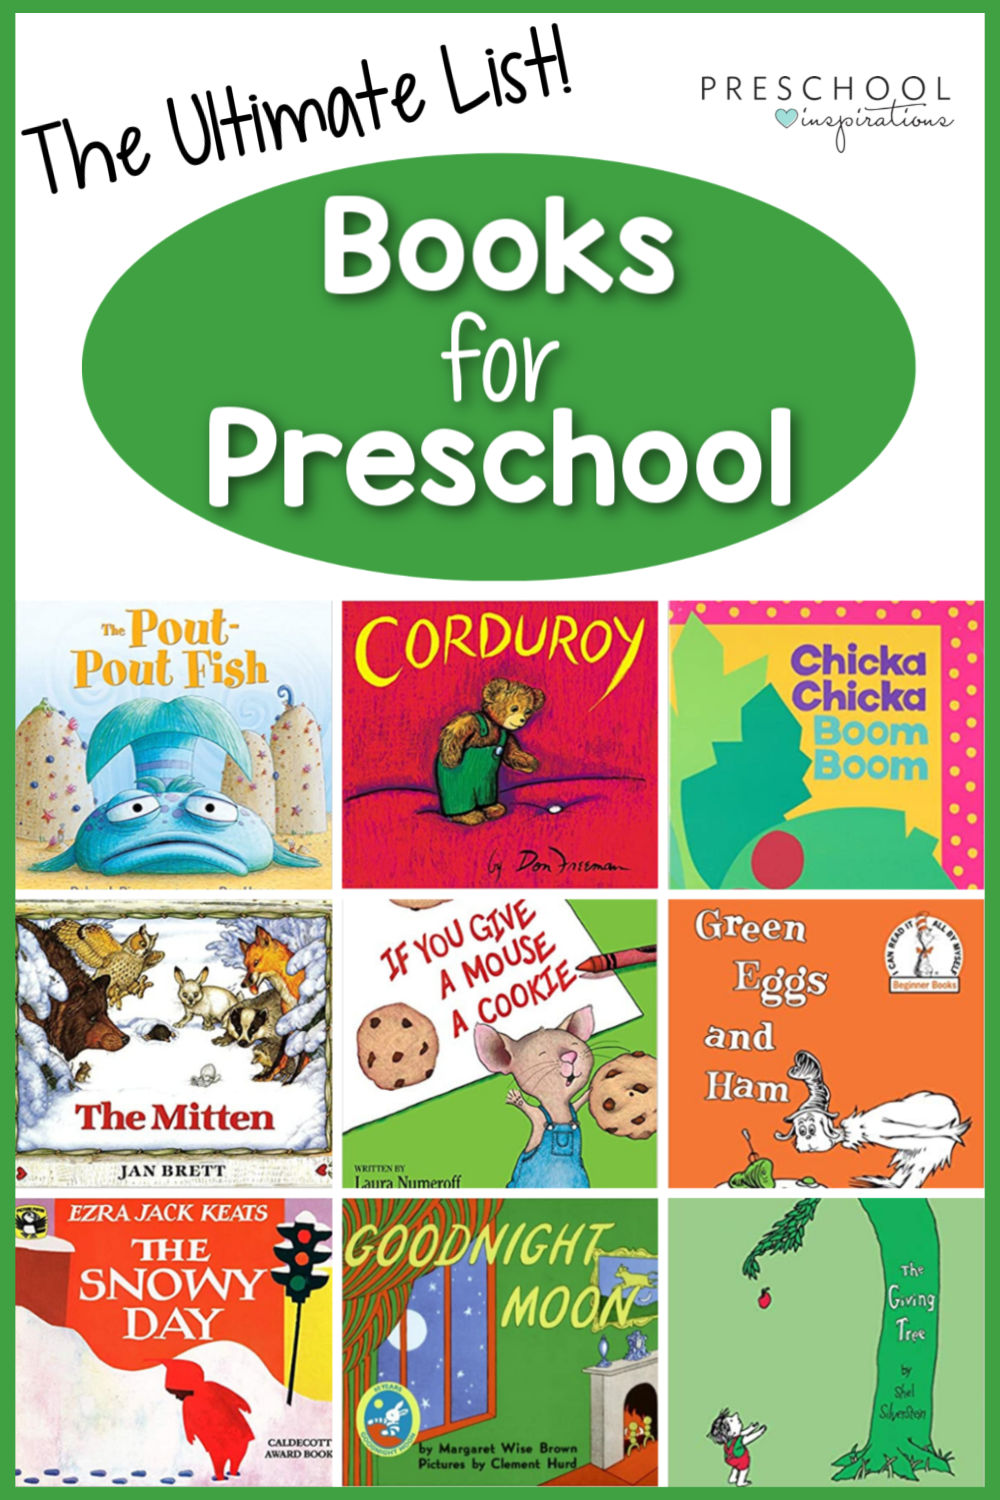 Find the best books for preschoolers, all in one place! A huge list with descriptions of read-aloud books, rhyming books, books on kindness, and many, many more! 